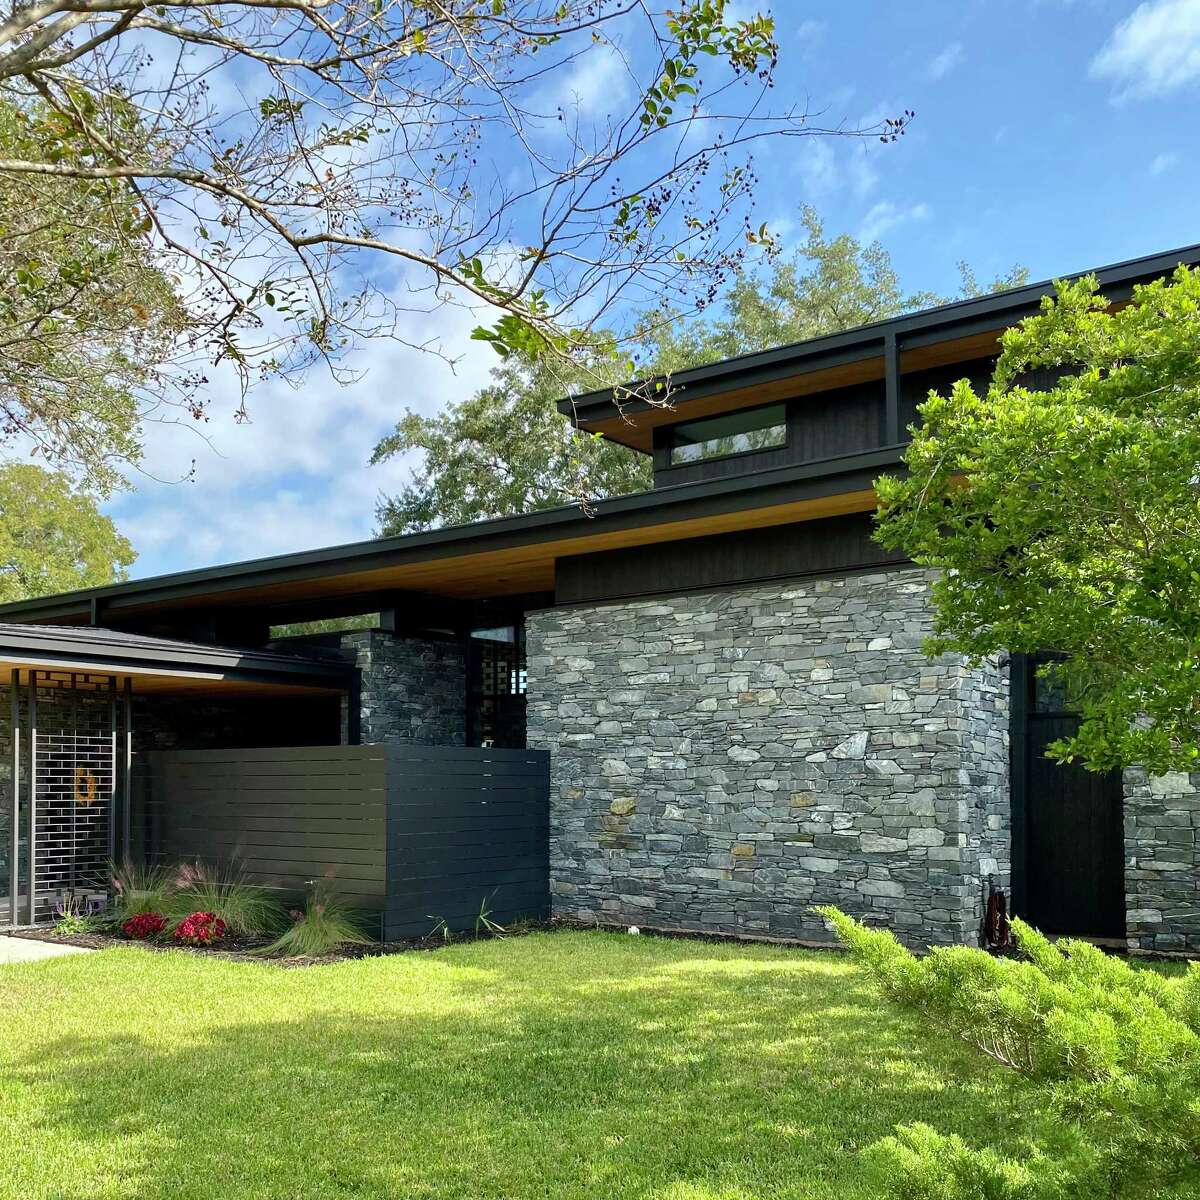 This home in Sugar Land, designed by studioMET, will be on the 2023 Modern Architecture and Design Society's Modern Home Tour.